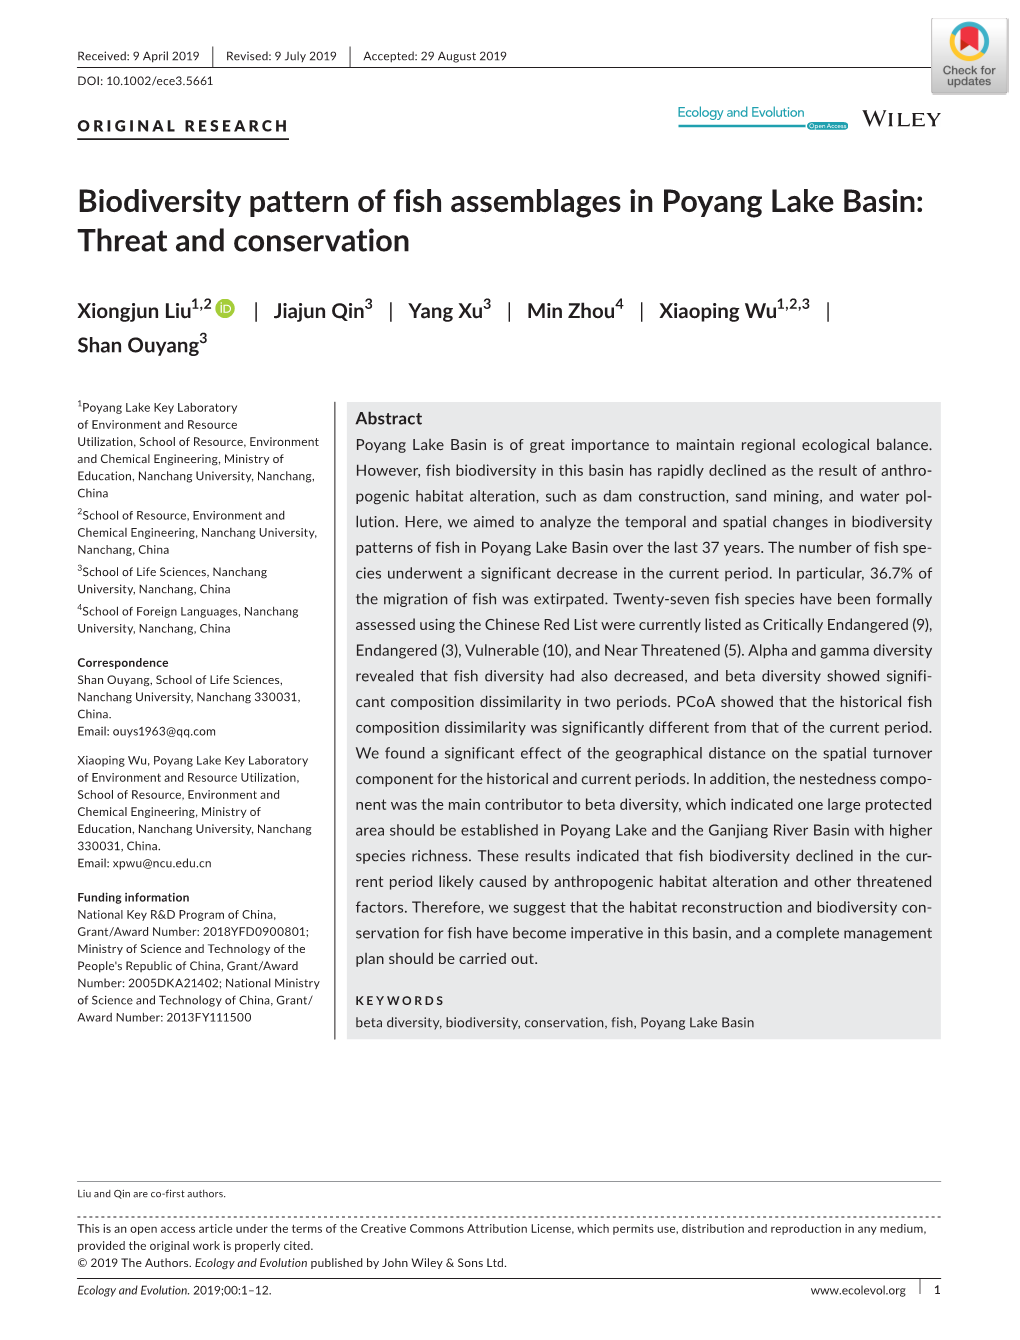 Biodiversity Pattern of Fish Assemblages in Poyang Lake Basin: Threat and Conservation